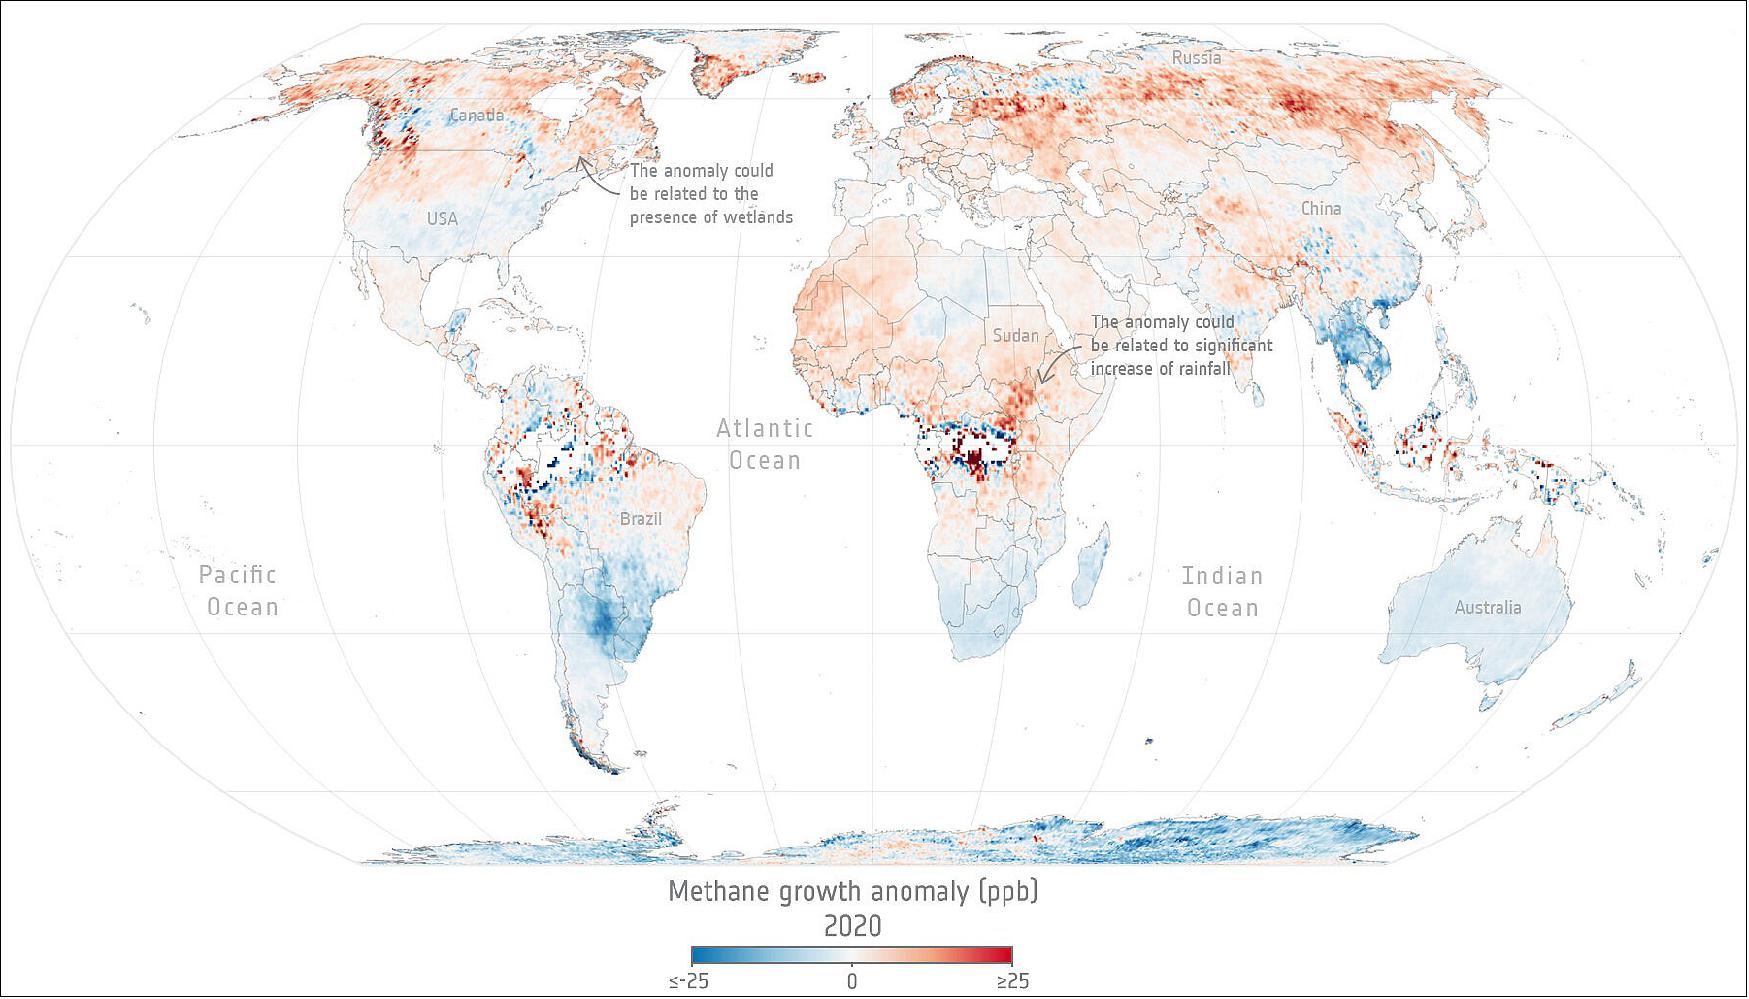 Figure 18: Methane growth anomaly. his global map shows the annual increase of methane emissions relative to the global mean annual increase and has been created using data from the Copernicus Sentinel-5P satellite (image credit: ESA, the image contains modified Copernicus Sentinel data (2020), processed by ESA, CC BY-SA 3.0 IGO)